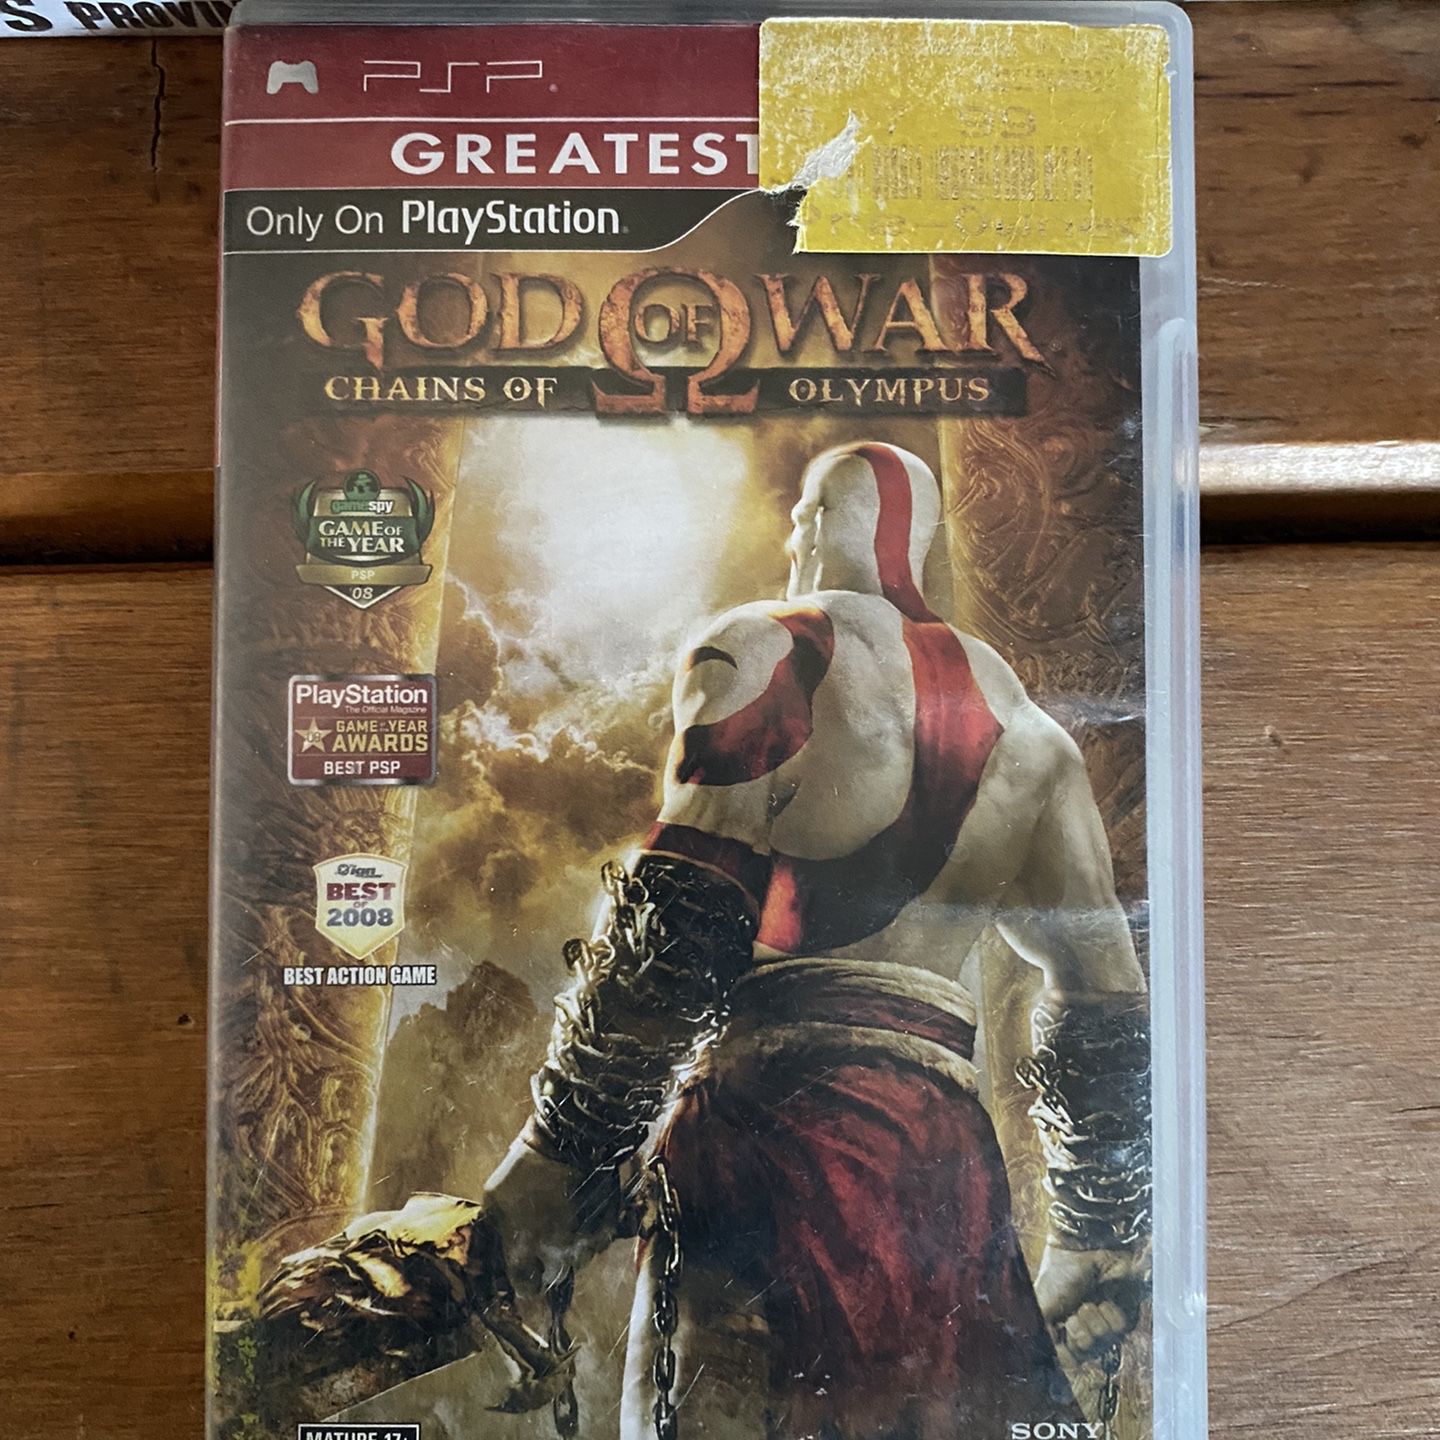 Psp God Of War Chains Of Olympus for Sale in Visalia, CA - OfferUp